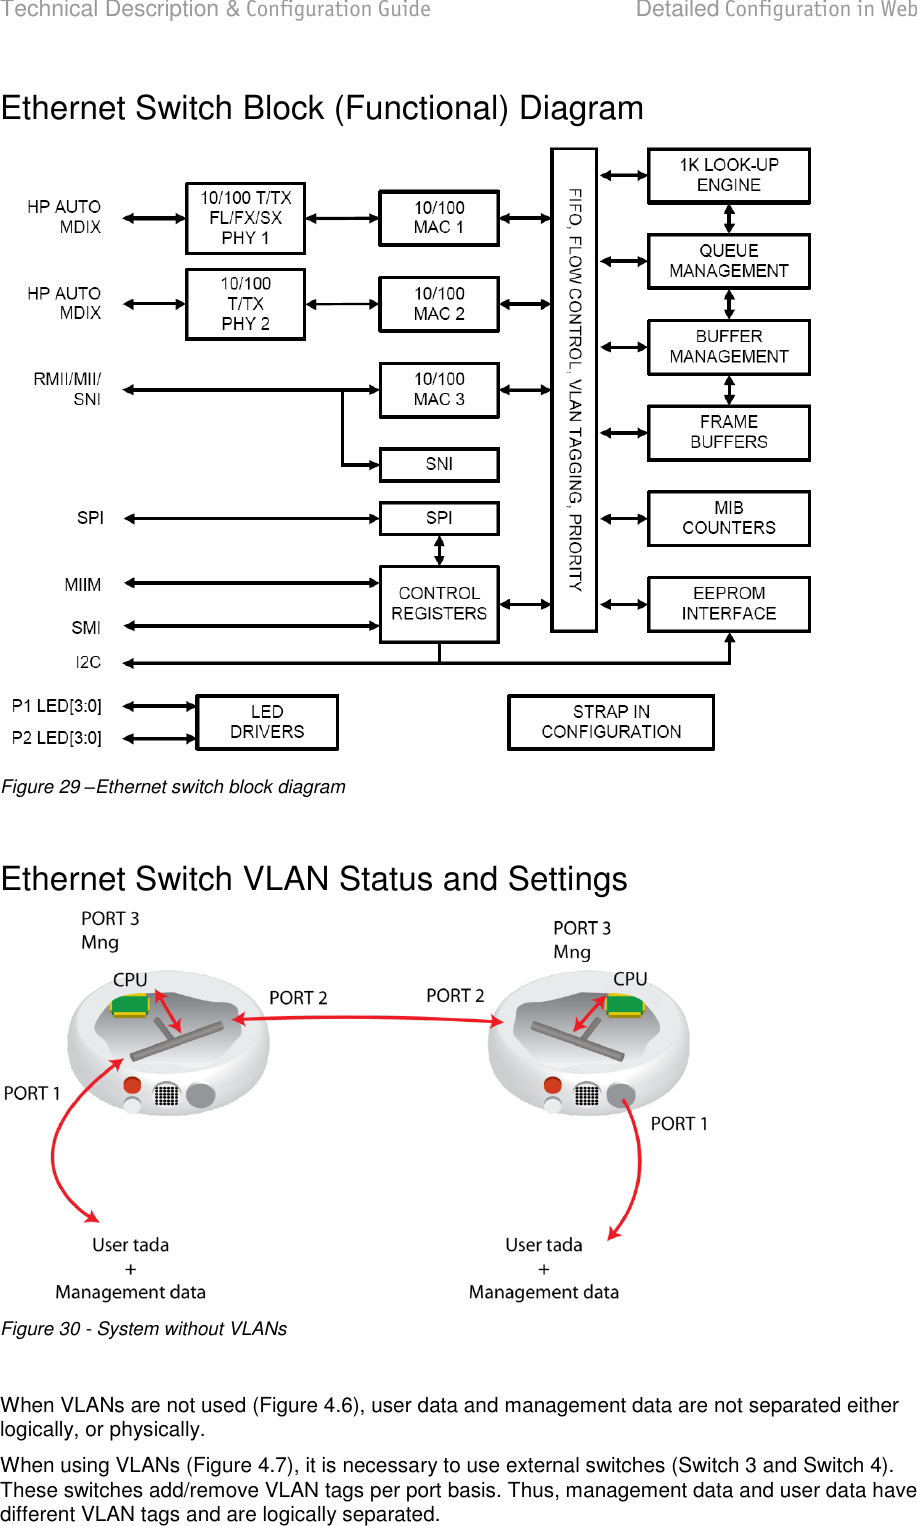 Technical Description &amp; Configuration Guide  Detailed Configuration in Web  LigoWave  Page 50 Ethernet Switch Block (Functional) Diagram  Figure 29 –Ethernet switch block diagram  Ethernet Switch VLAN Status and Settings  Figure 30 - System without VLANs  When VLANs are not used (Figure 4.6), user data and management data are not separated either logically, or physically.  When using VLANs (Figure 4.7), it is necessary to use external switches (Switch 3 and Switch 4). These switches add/remove VLAN tags per port basis. Thus, management data and user data have different VLAN tags and are logically separated.  